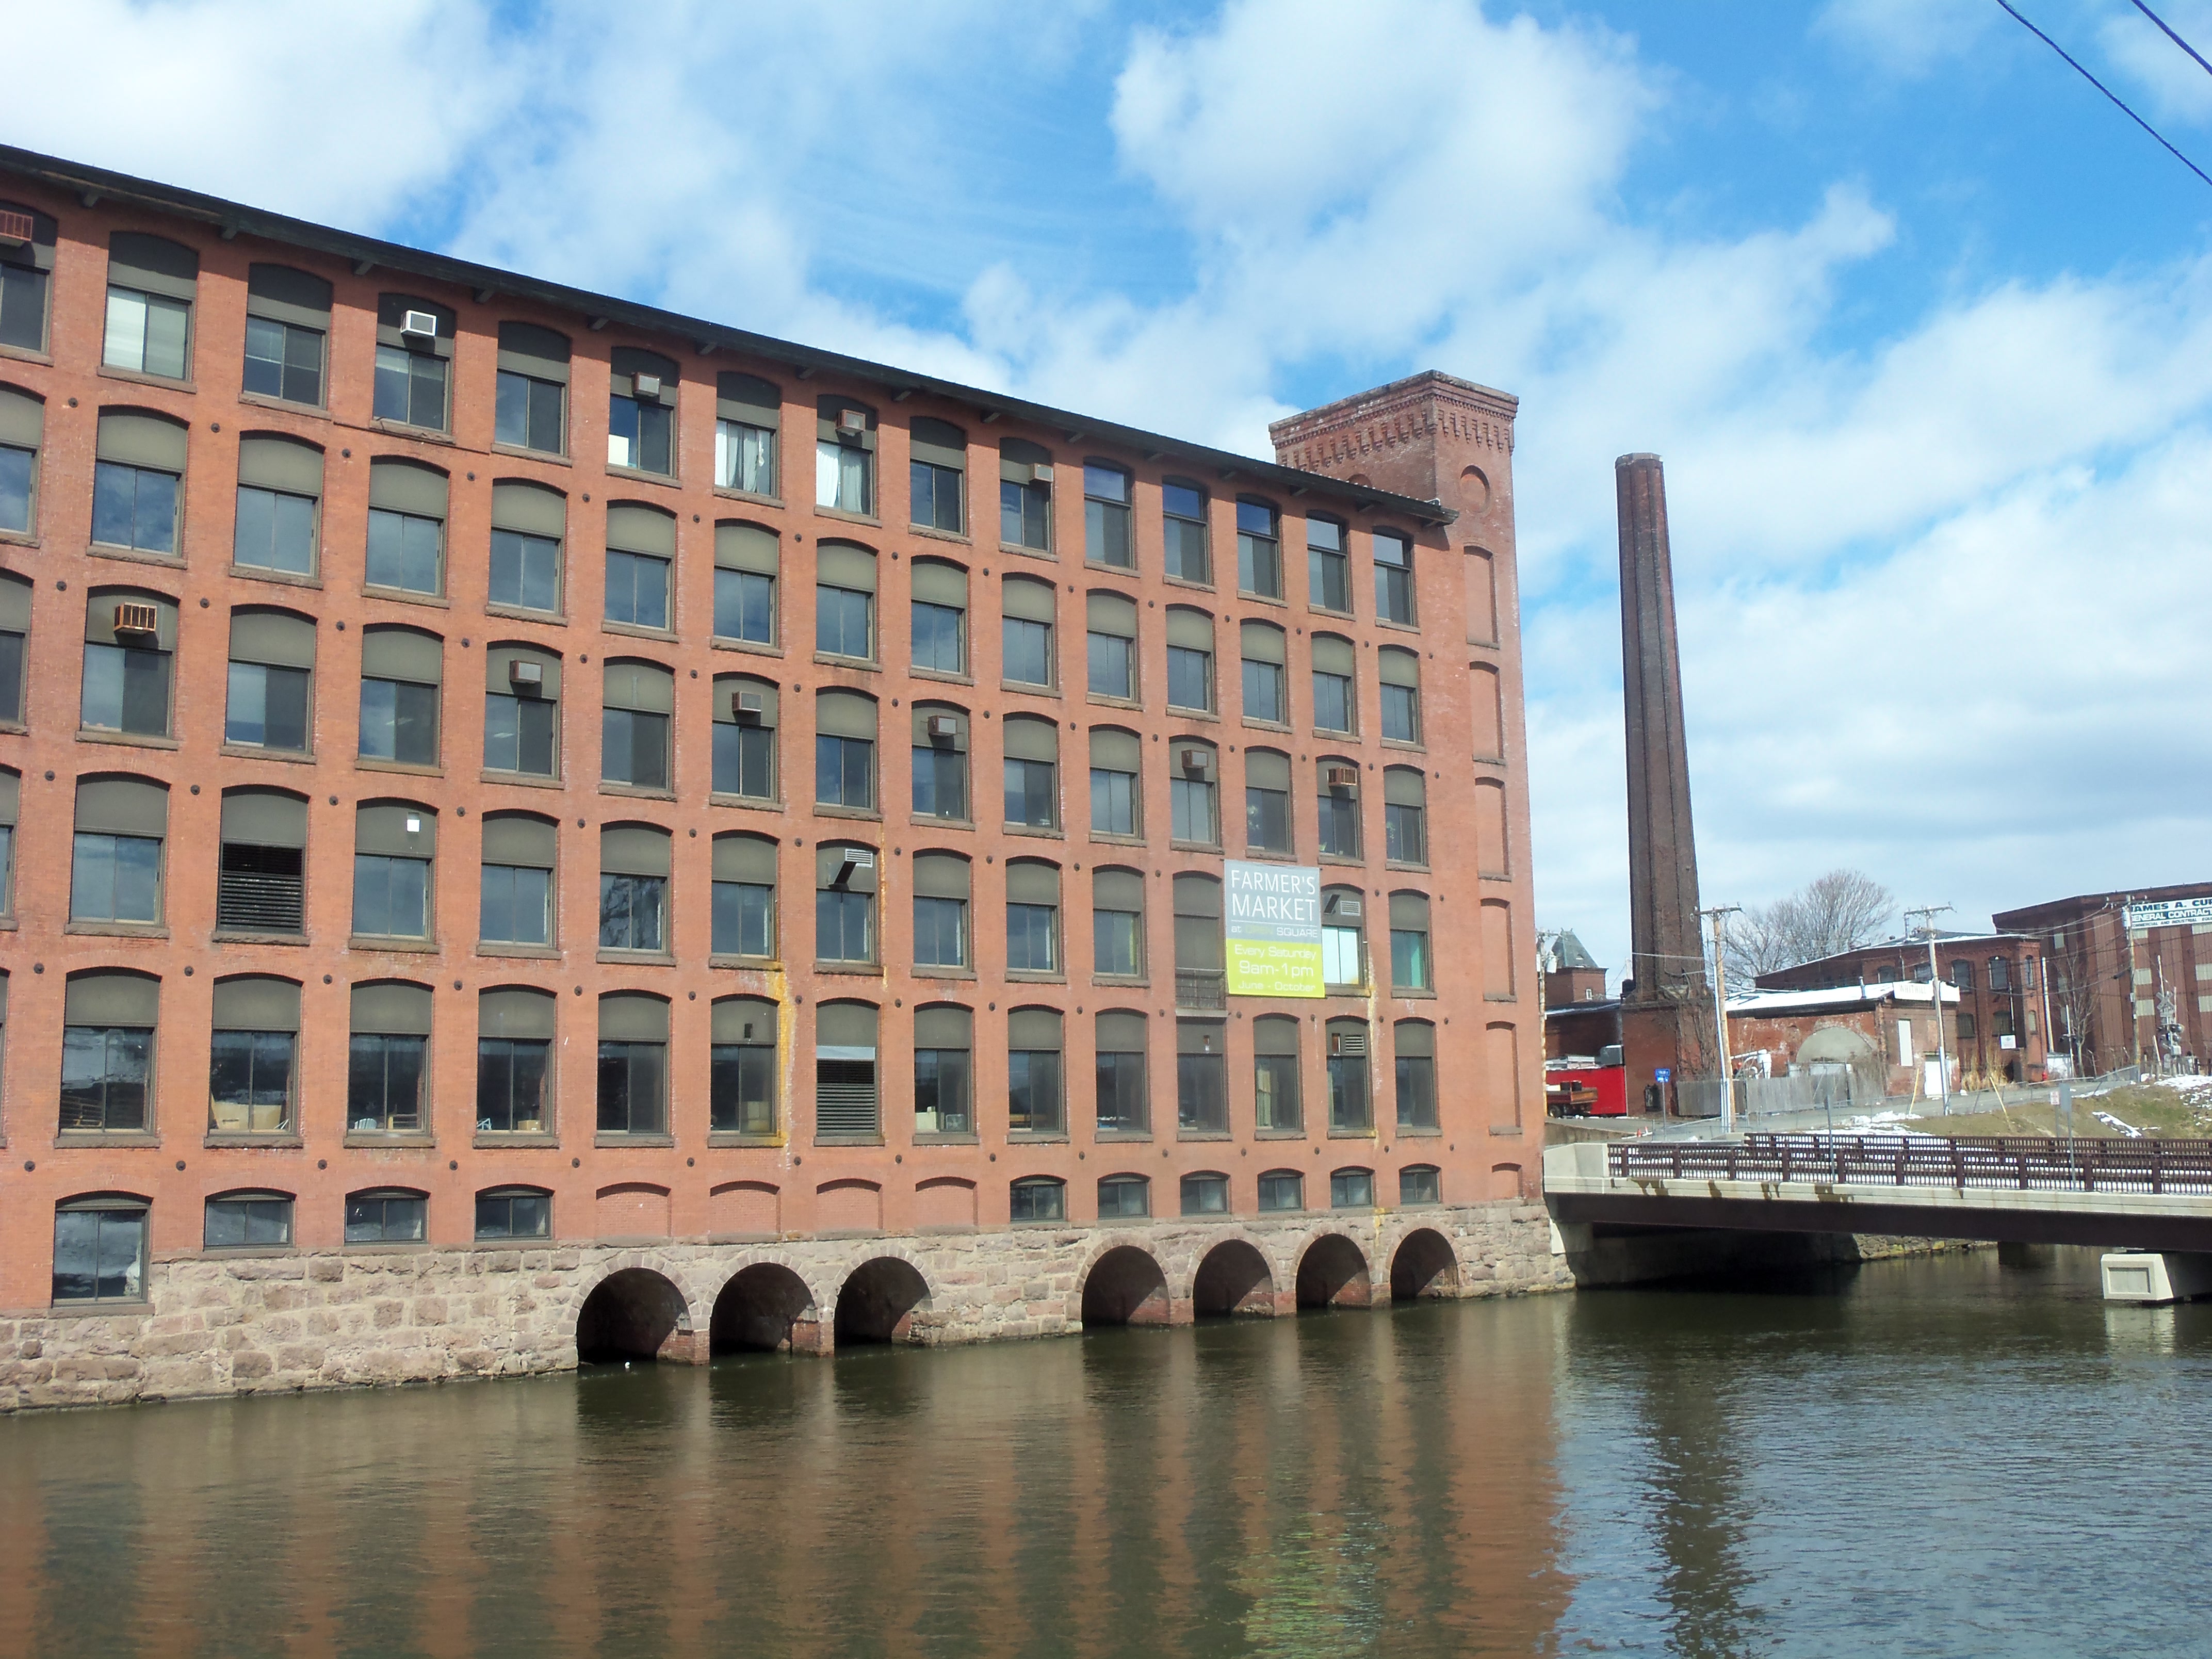 Holyoke mill and canal